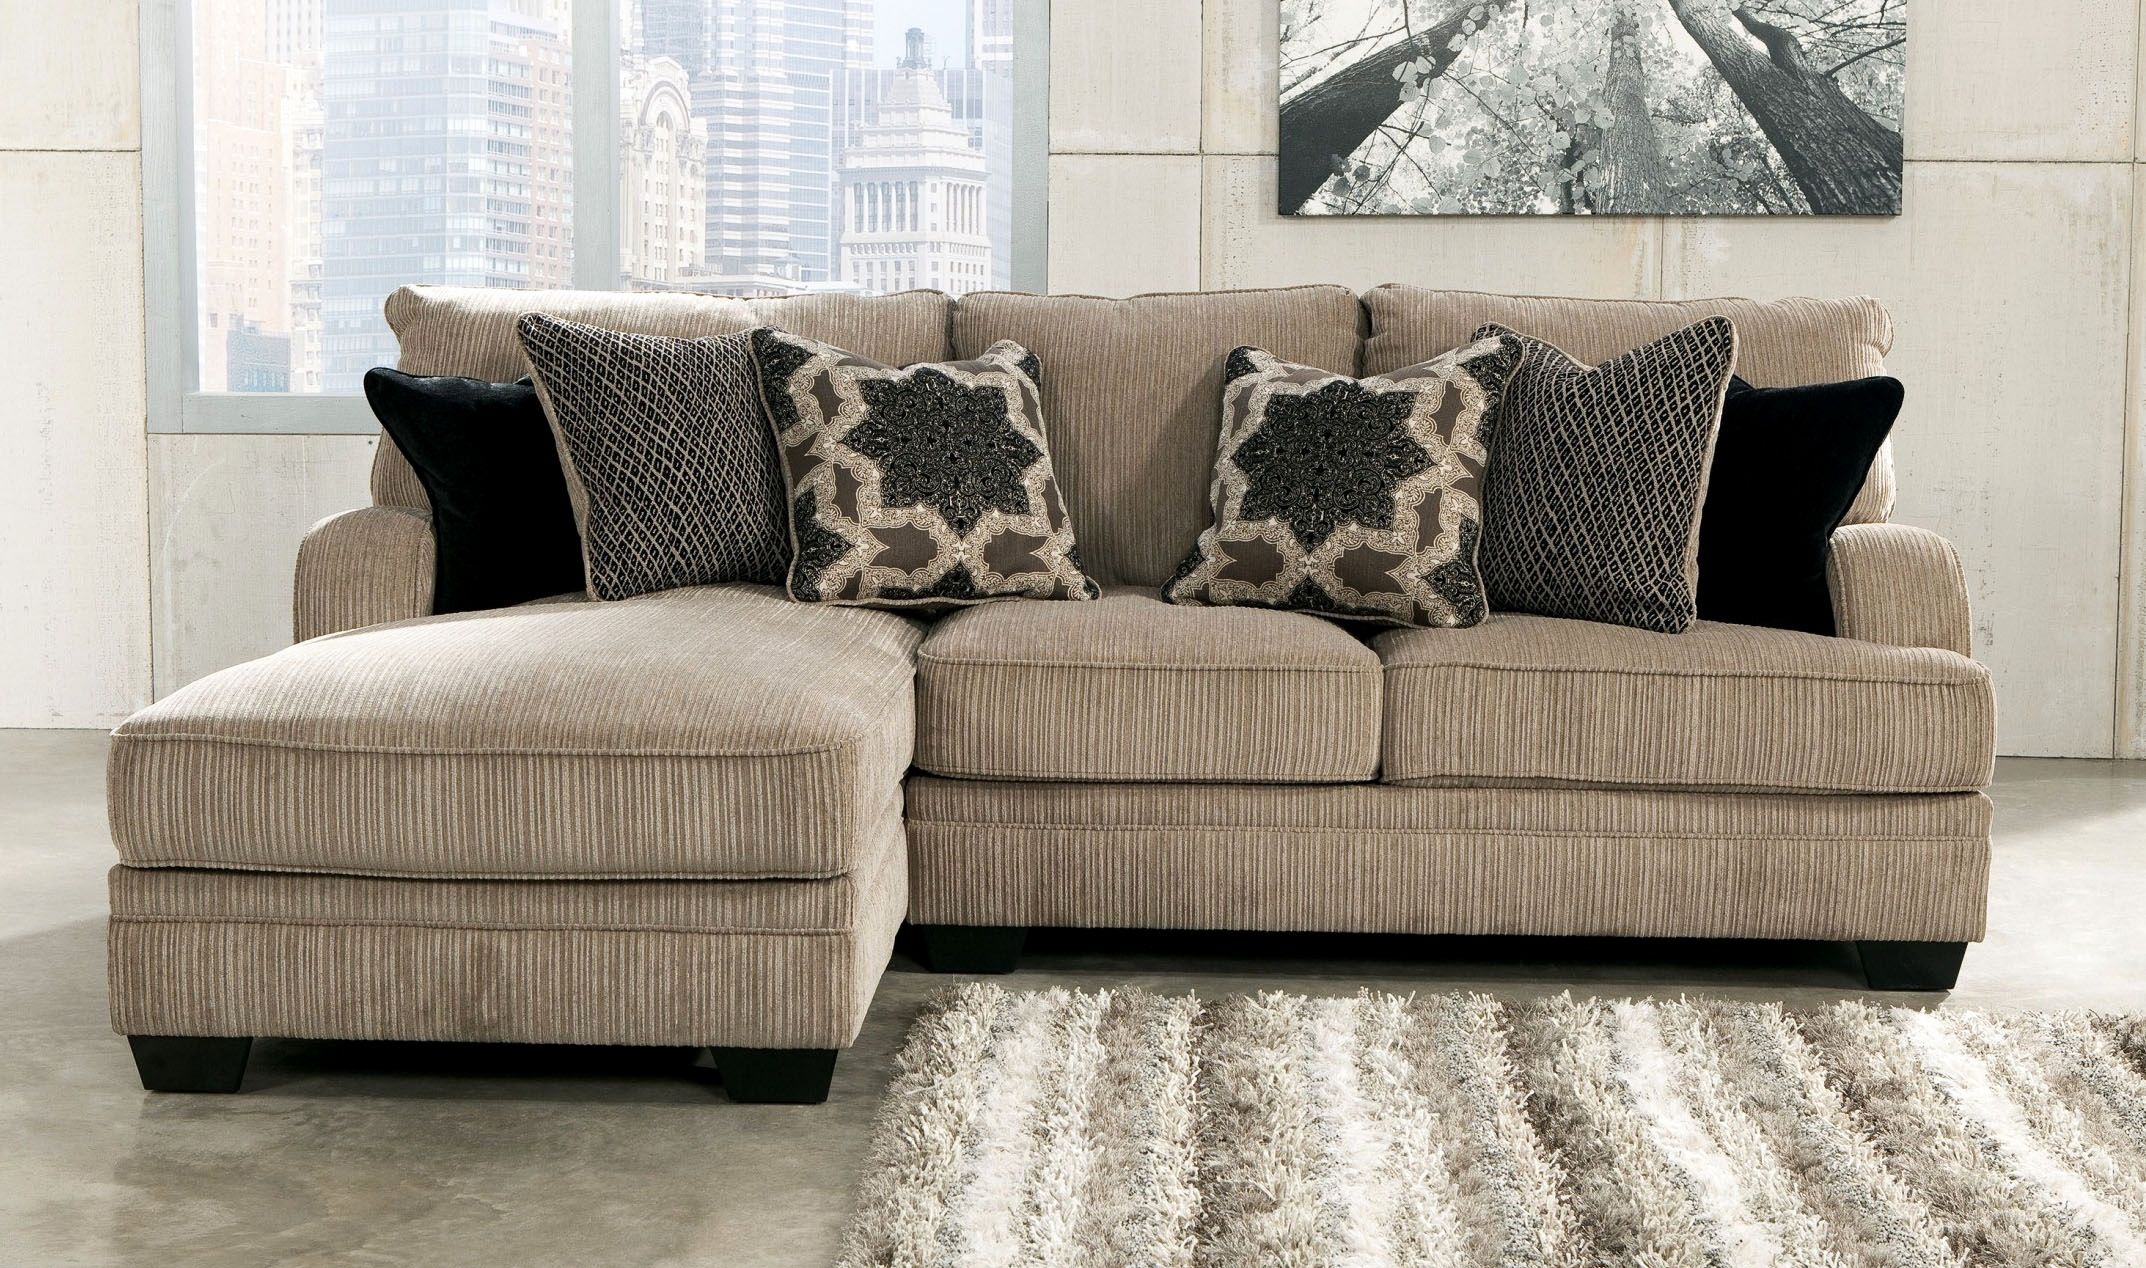 Slipcover Sectional Sofa With Chaise Comfortable Amazing Sectional Intended For Sectional Sofas With Recliners For Small Spaces (View 4 of 10)